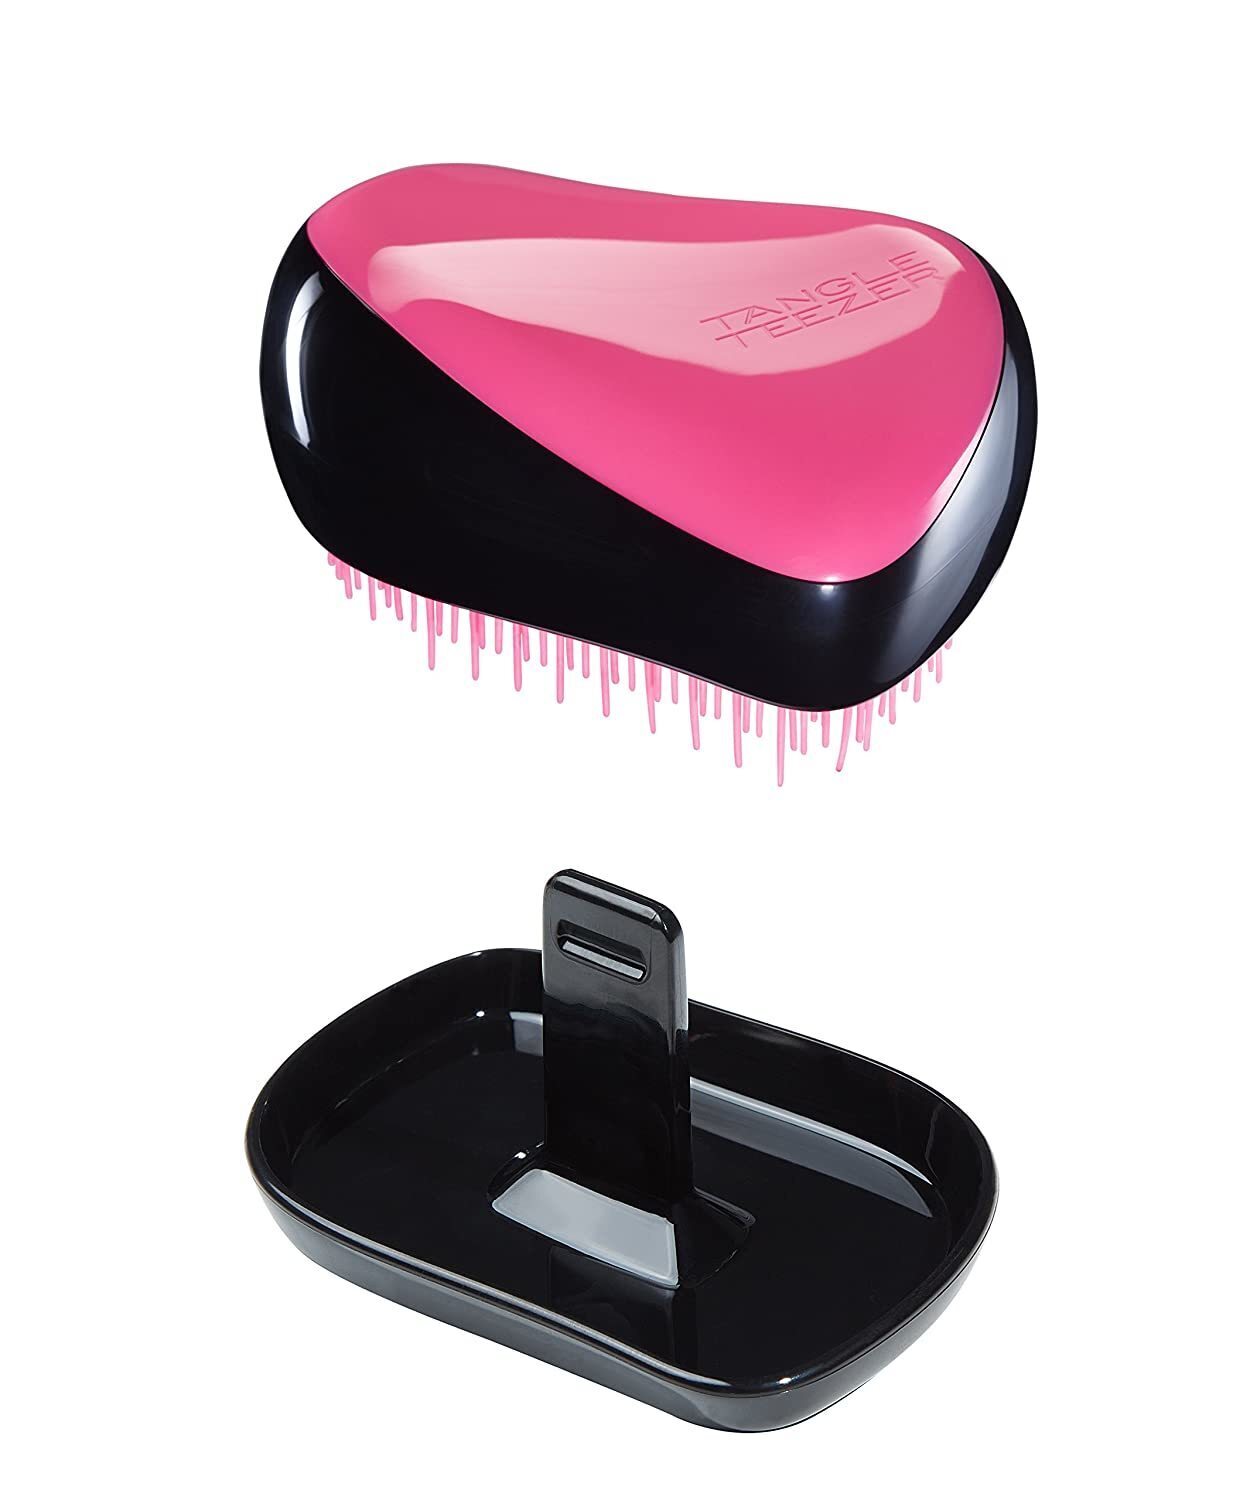 TT Compact Styler Pink Sizzle